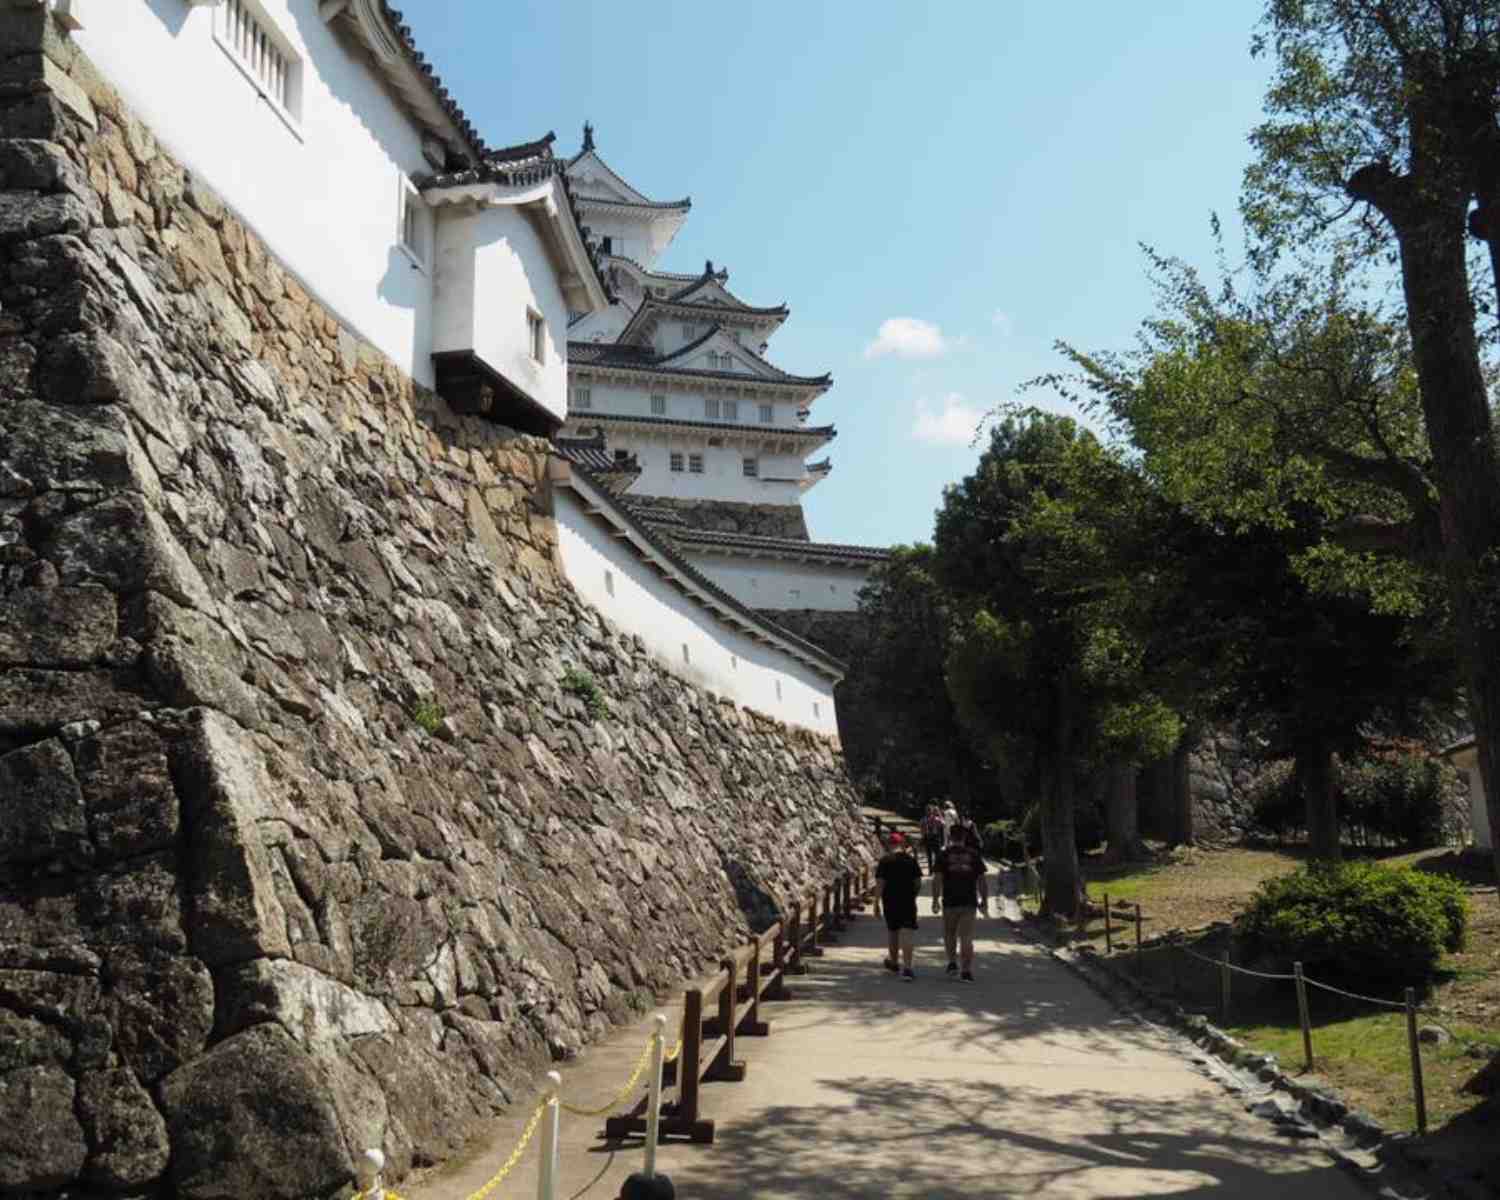 The Multi-tiered Walls of Himeji Castle